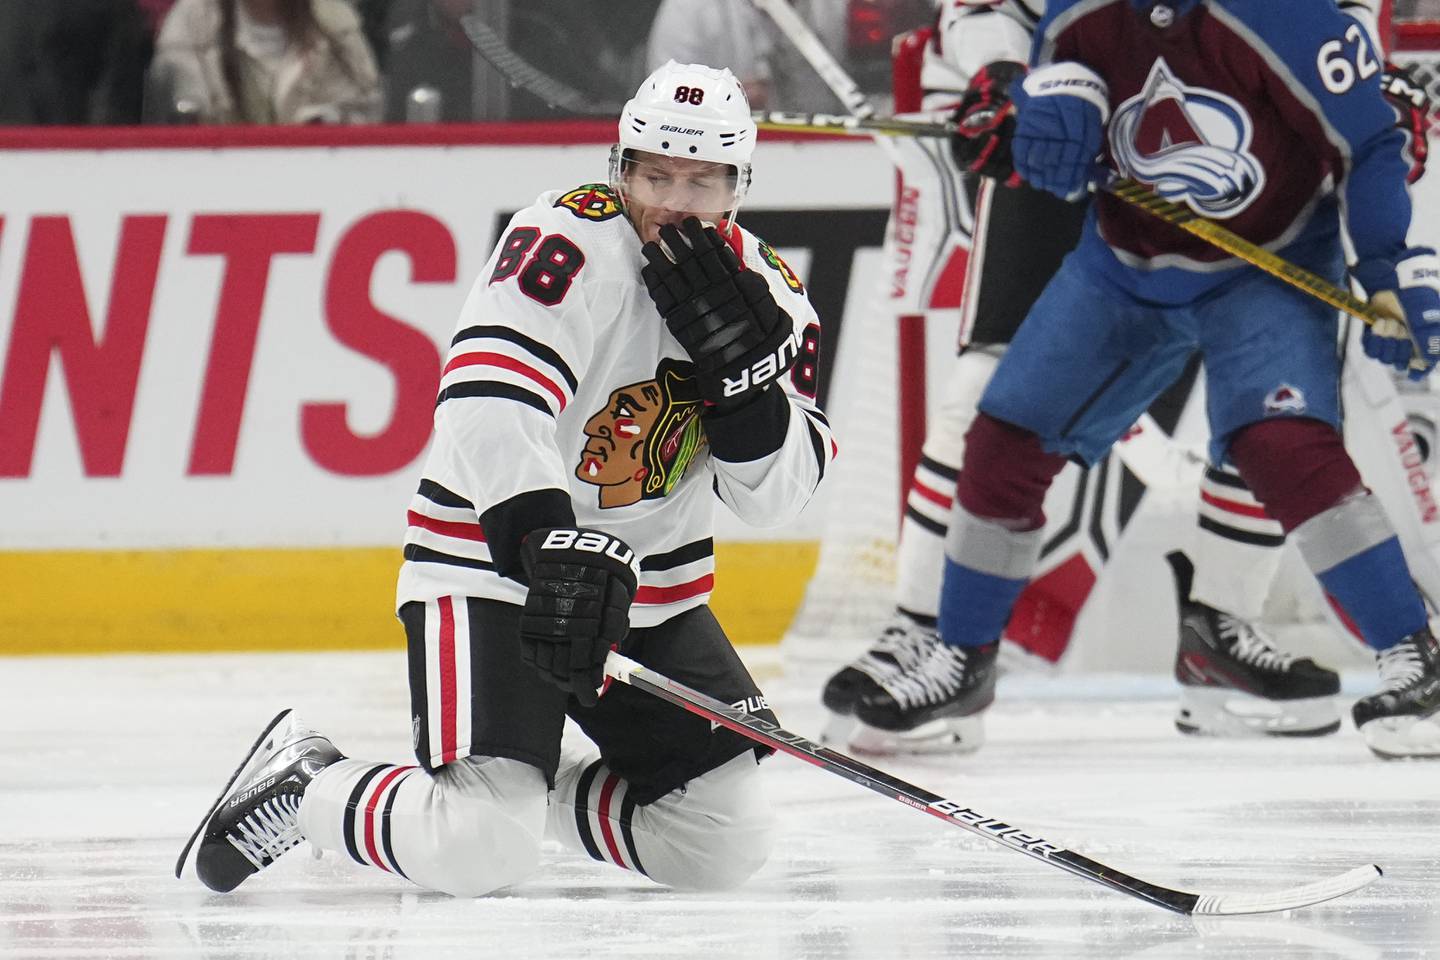 Blackhawks right wing Patrick Kane (88) reacts after getting hit in the face by a puck against the Avalanche on Oct. 12, 2022, in Denver.